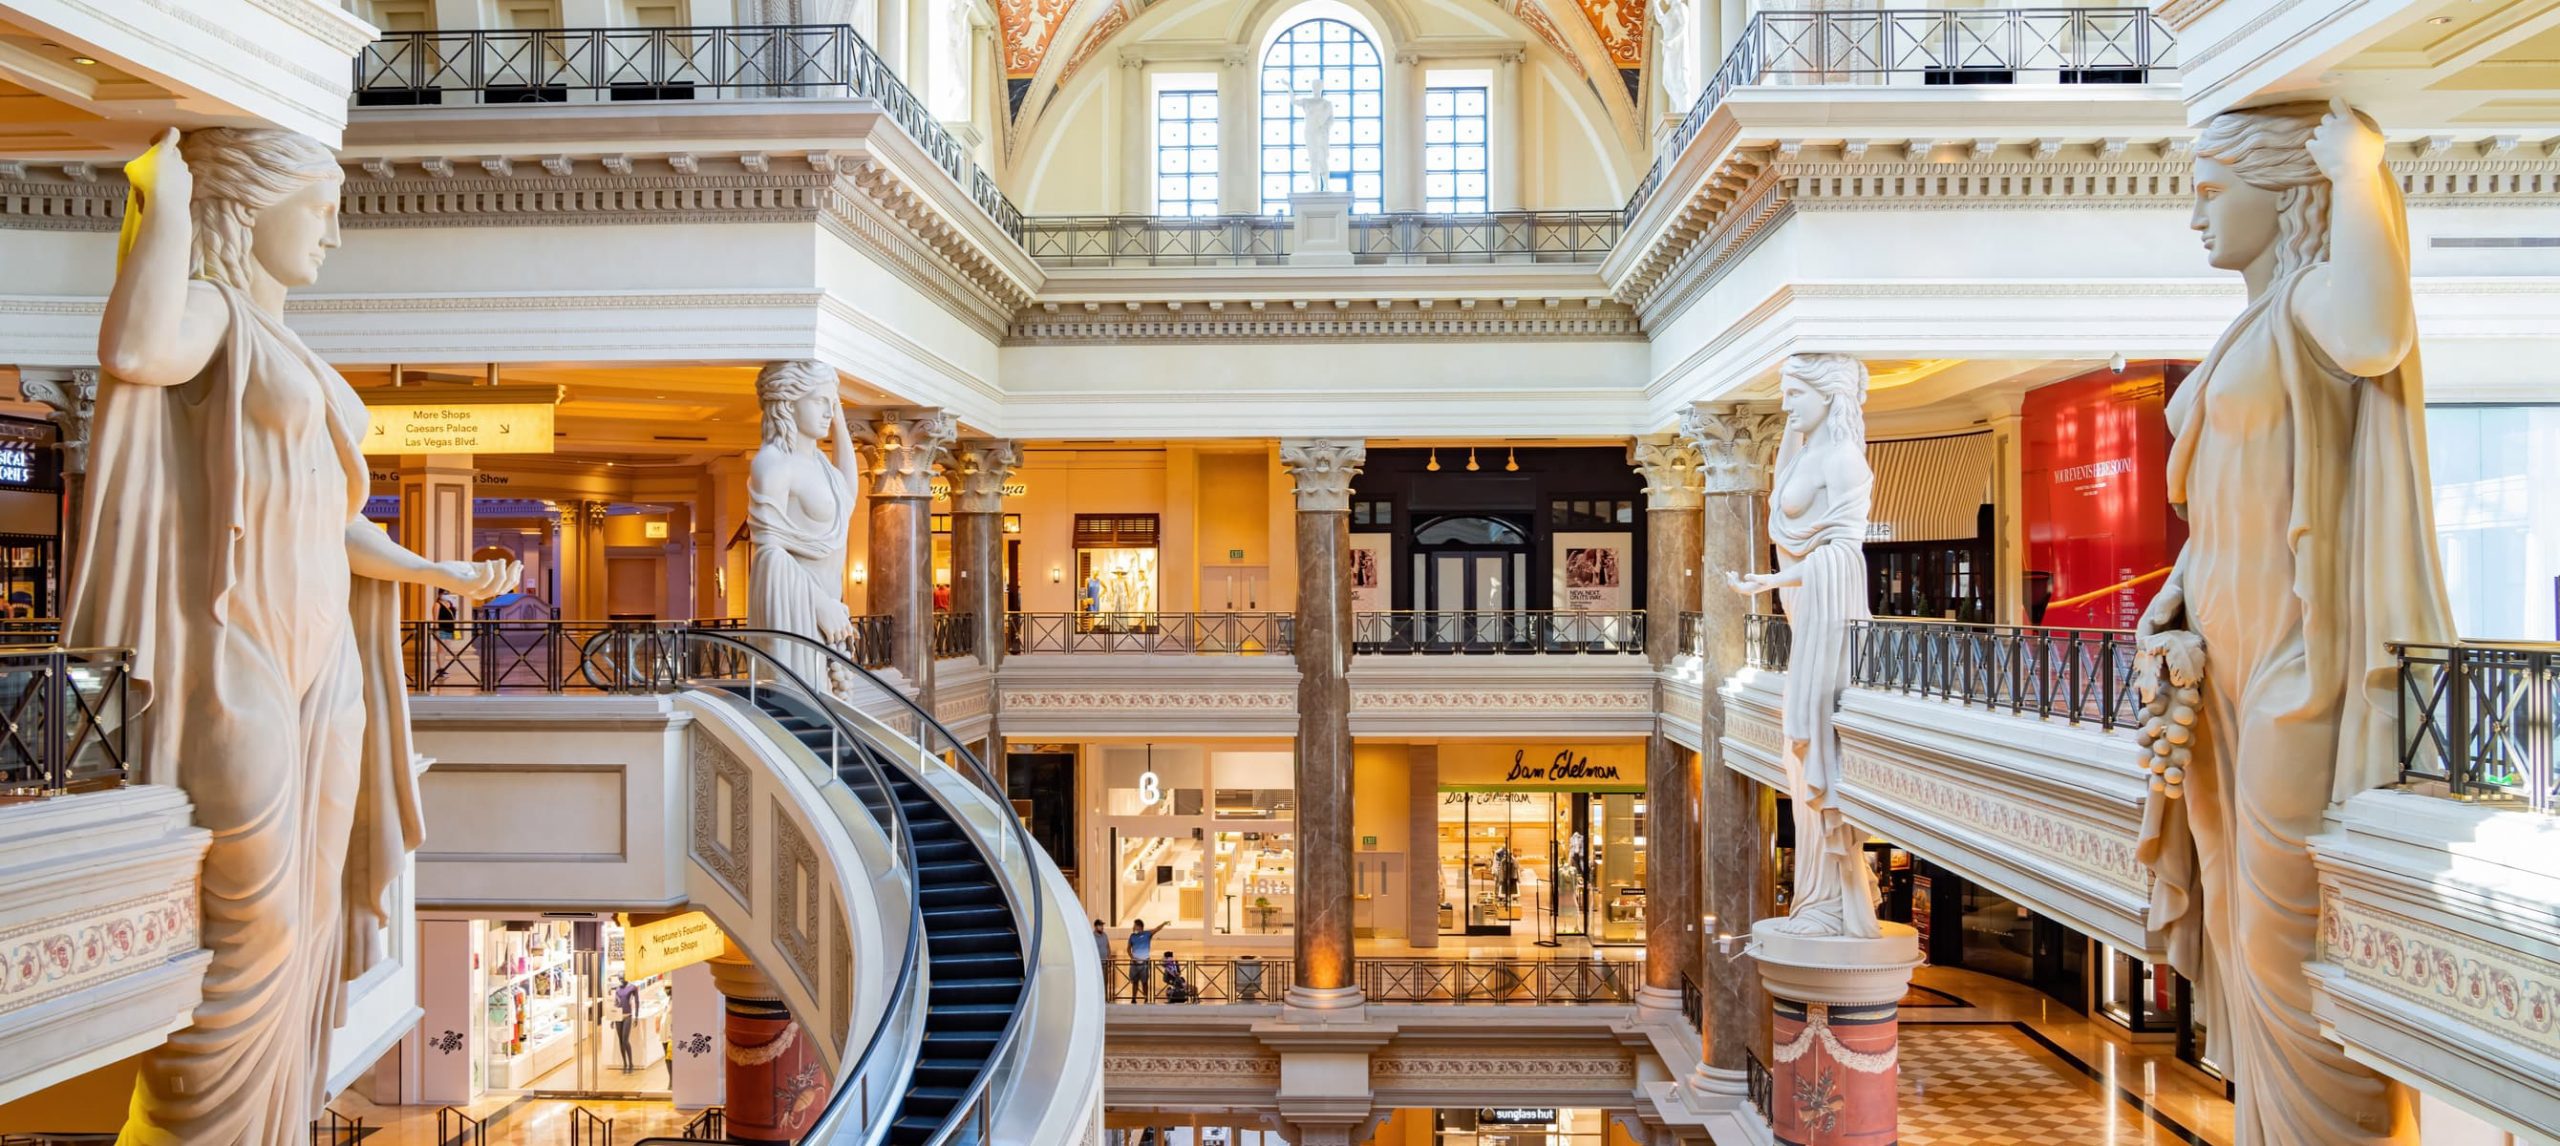 9 Great Places to Go Shopping in Las Vegas